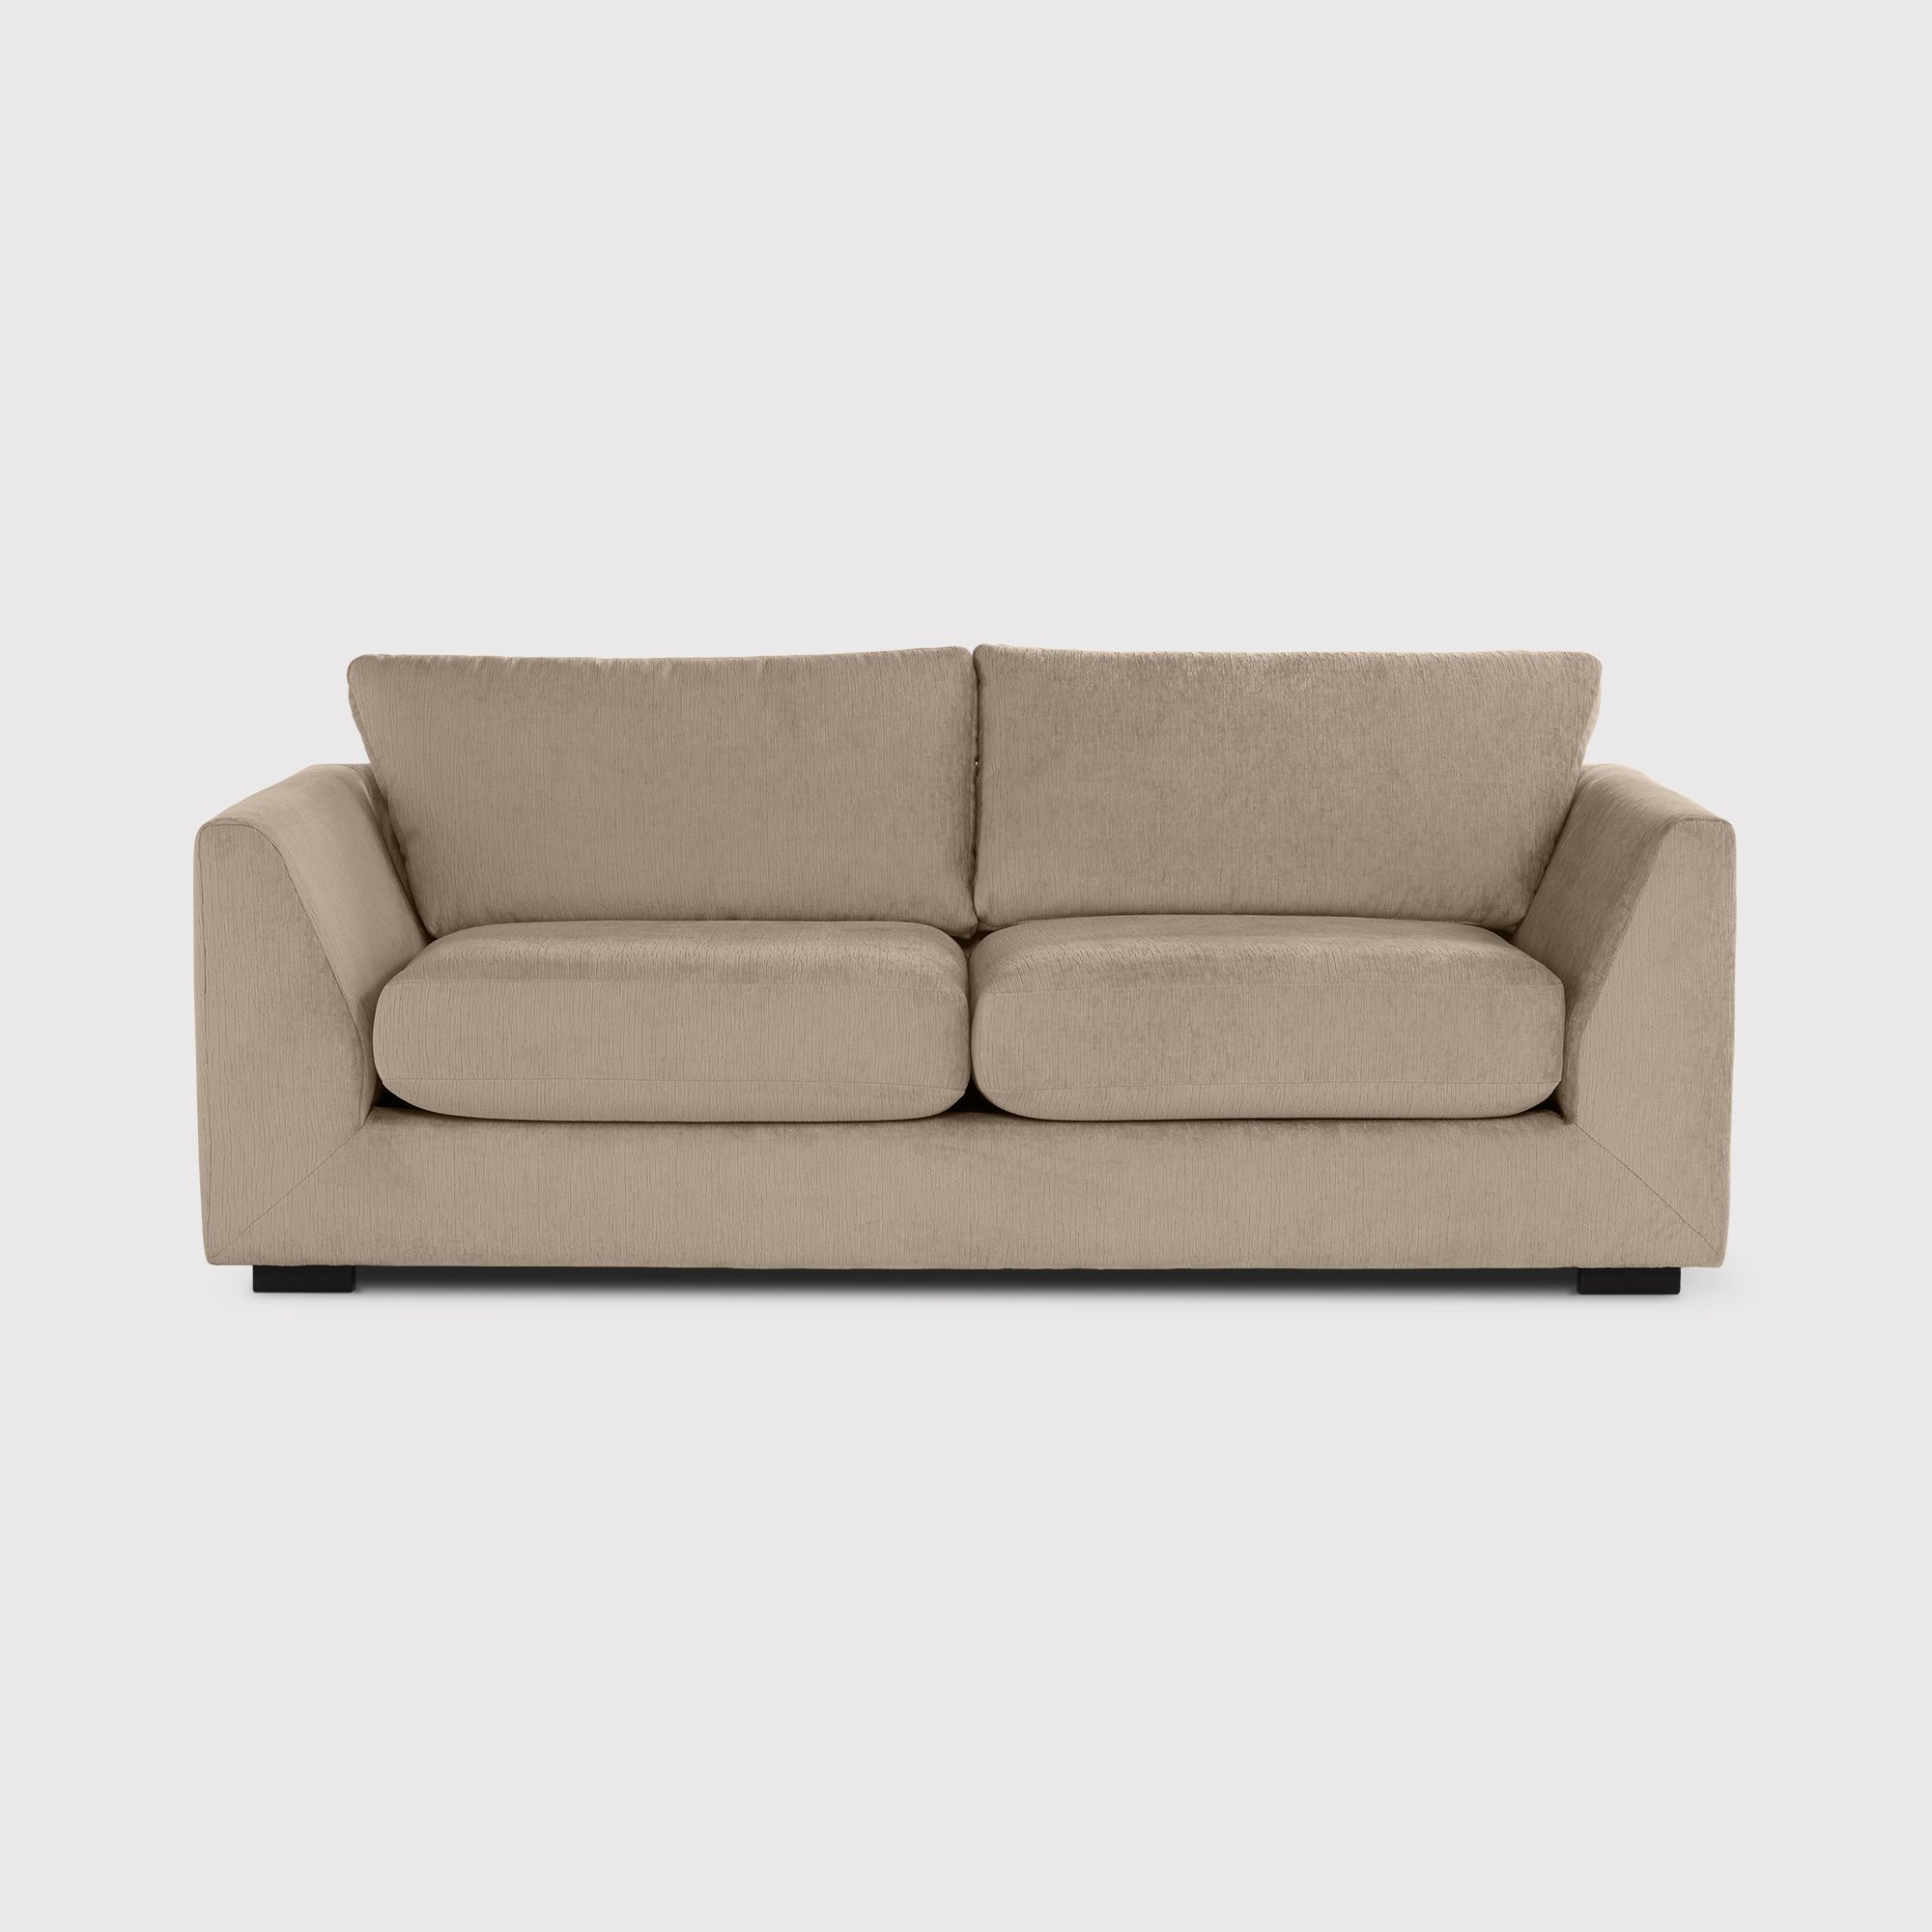 Melby 3 Seater Sofa | Barker & Stonehouse